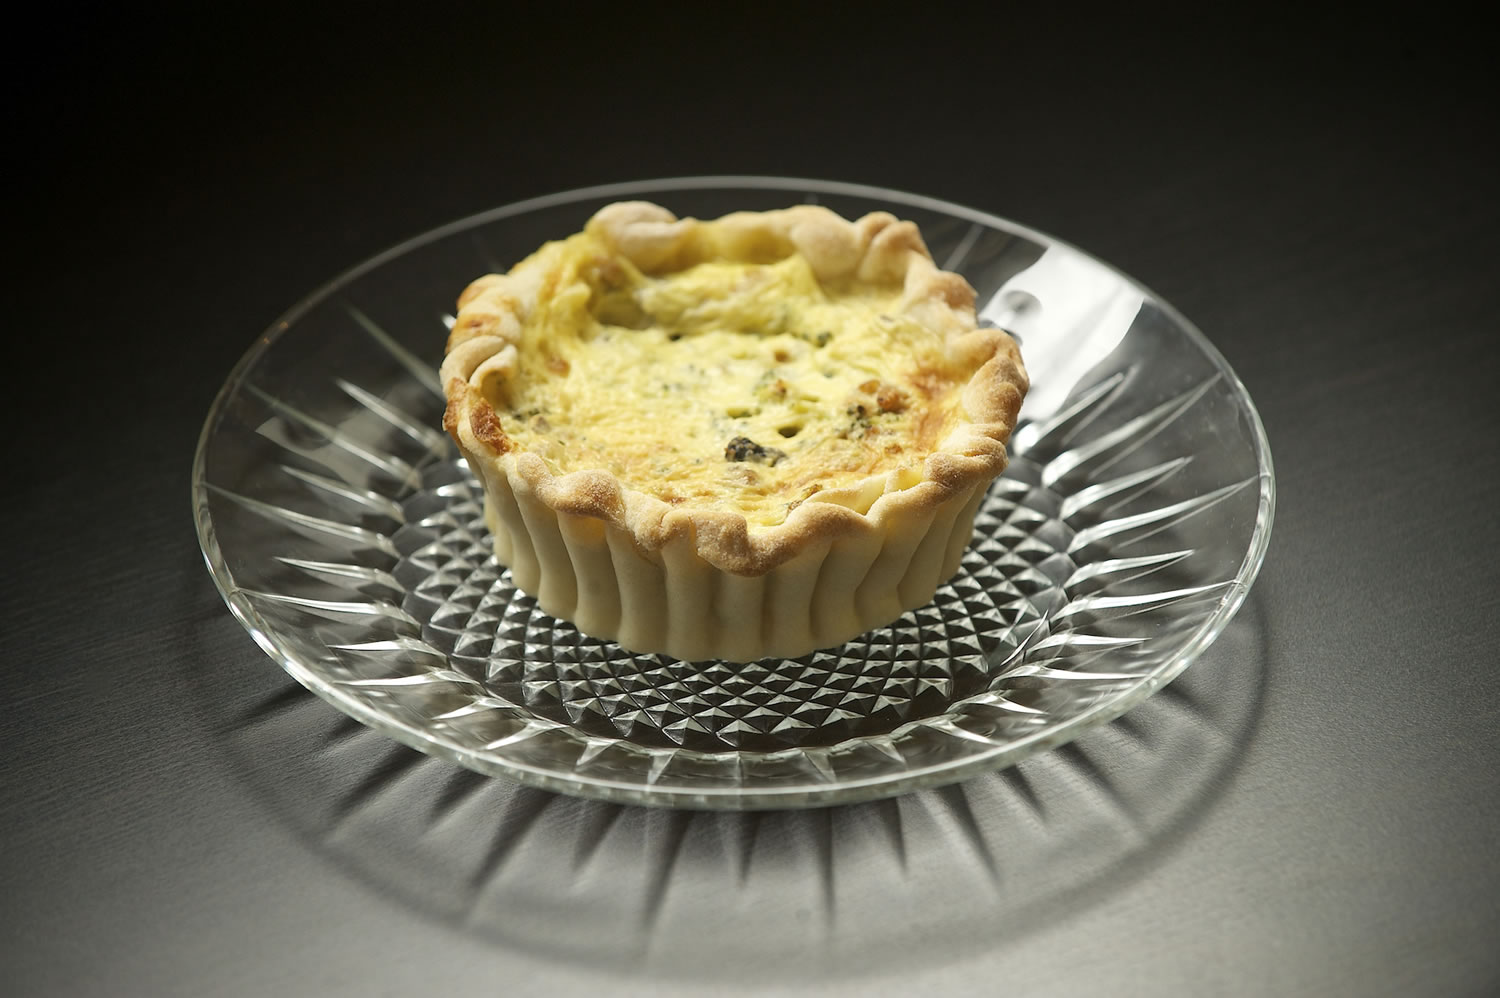 The sausage quiche from the Vancouver Pie Company is a scrumptious creation that includes sweet fennel sausage and broccoli.